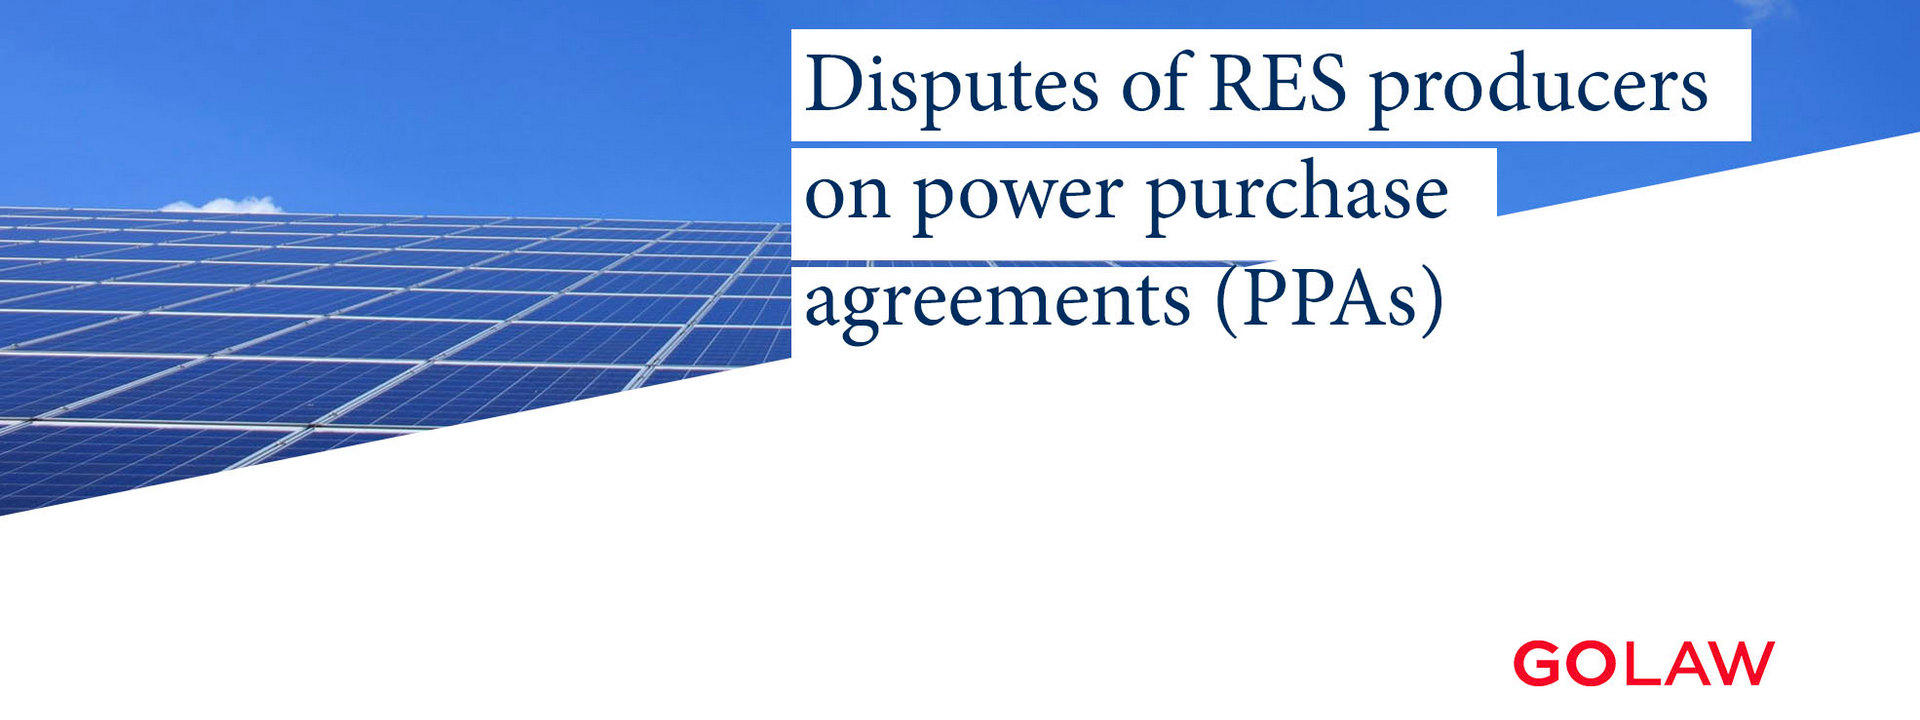 Disputes of RES Producers on Power Purchase Agreements (PPAs)